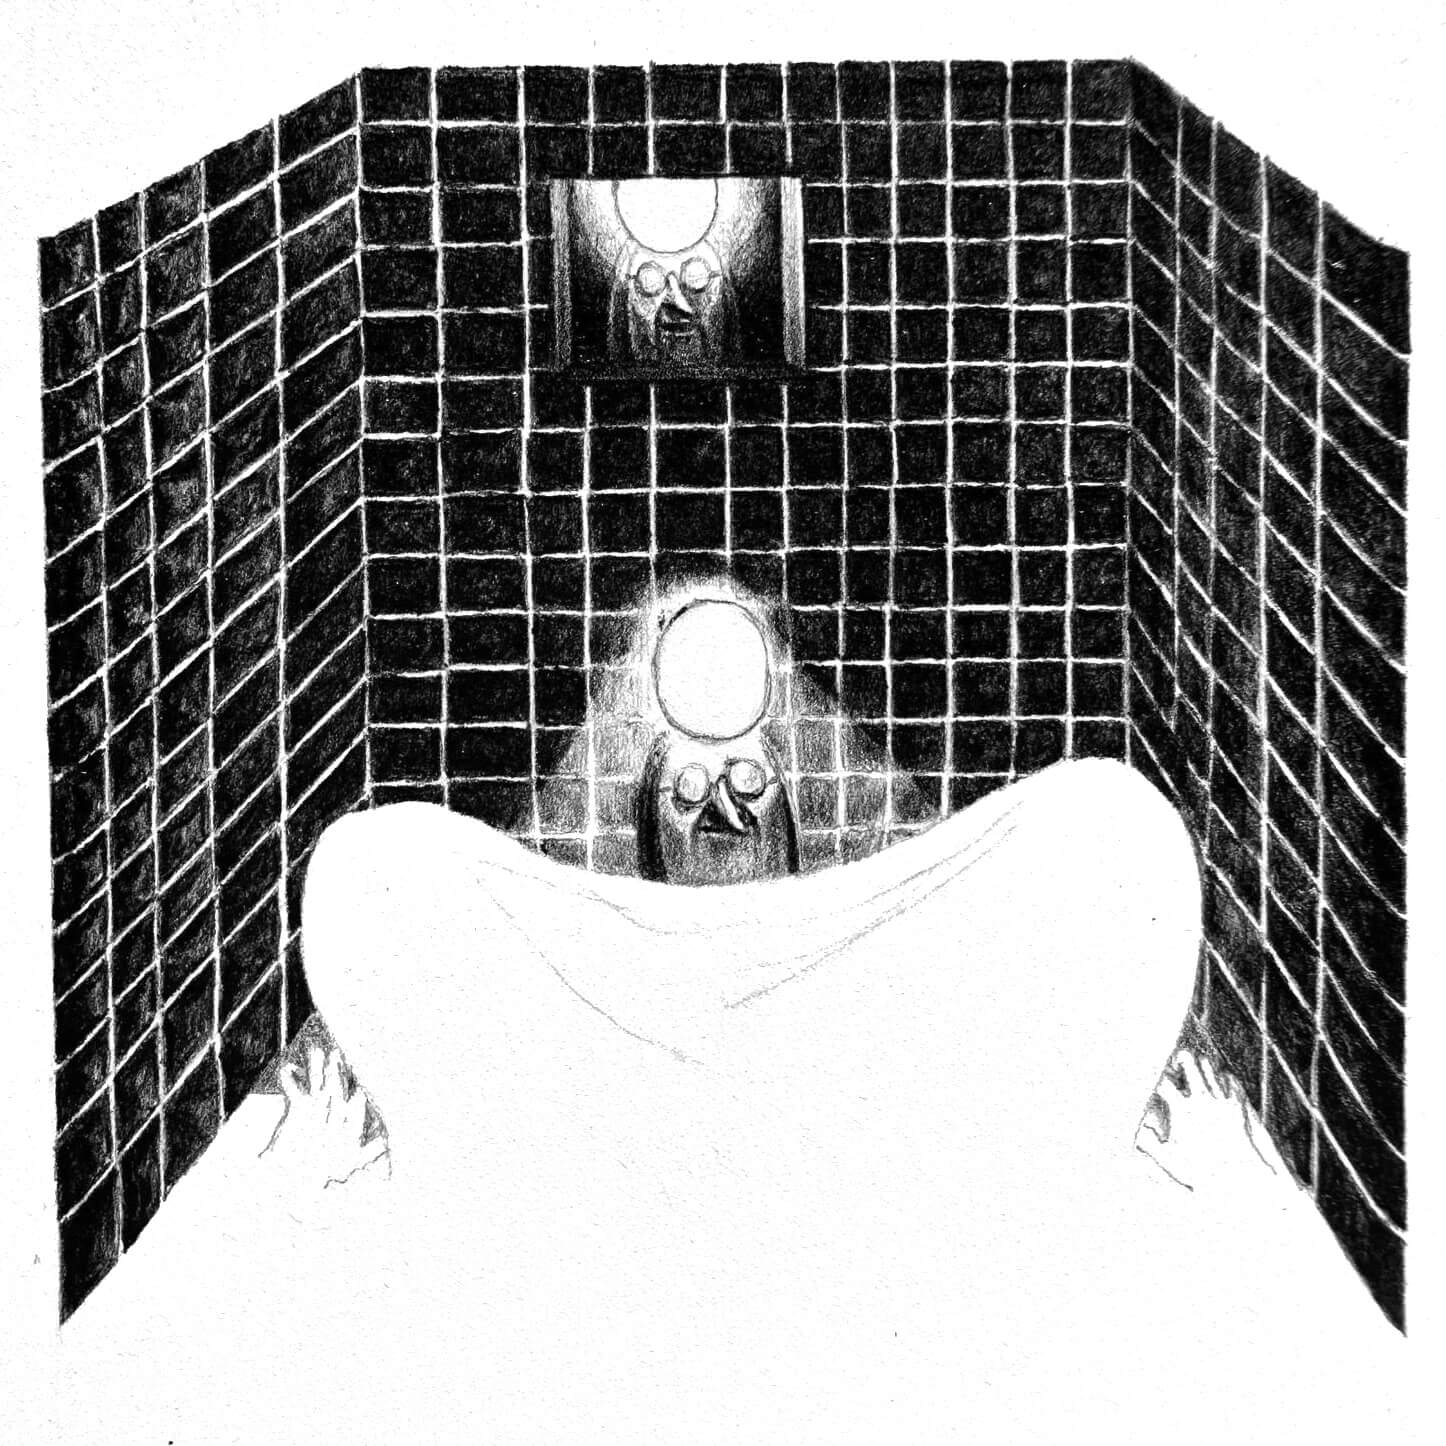 Scene 2:
The same hospital room, spun ninety degrees to an even more claustrophobic angle and seen from the eyes of the patient. Three gridded, tiled walls close in around the doctor. 

At first, he seems to be there alone, but the x-ray widget reveals the patient is there too. The patient lies supine on an elevated table, drawn from the waist down with their knees draped in cloth and hands gripping the table’s edge. The doctor’s head emerges from between the patient’s legs and he stares straight at us, a headlamp illuminating the wall around his smiling face. Directly behind him, an identical doctor with mouth agape is watching through a small dark window.